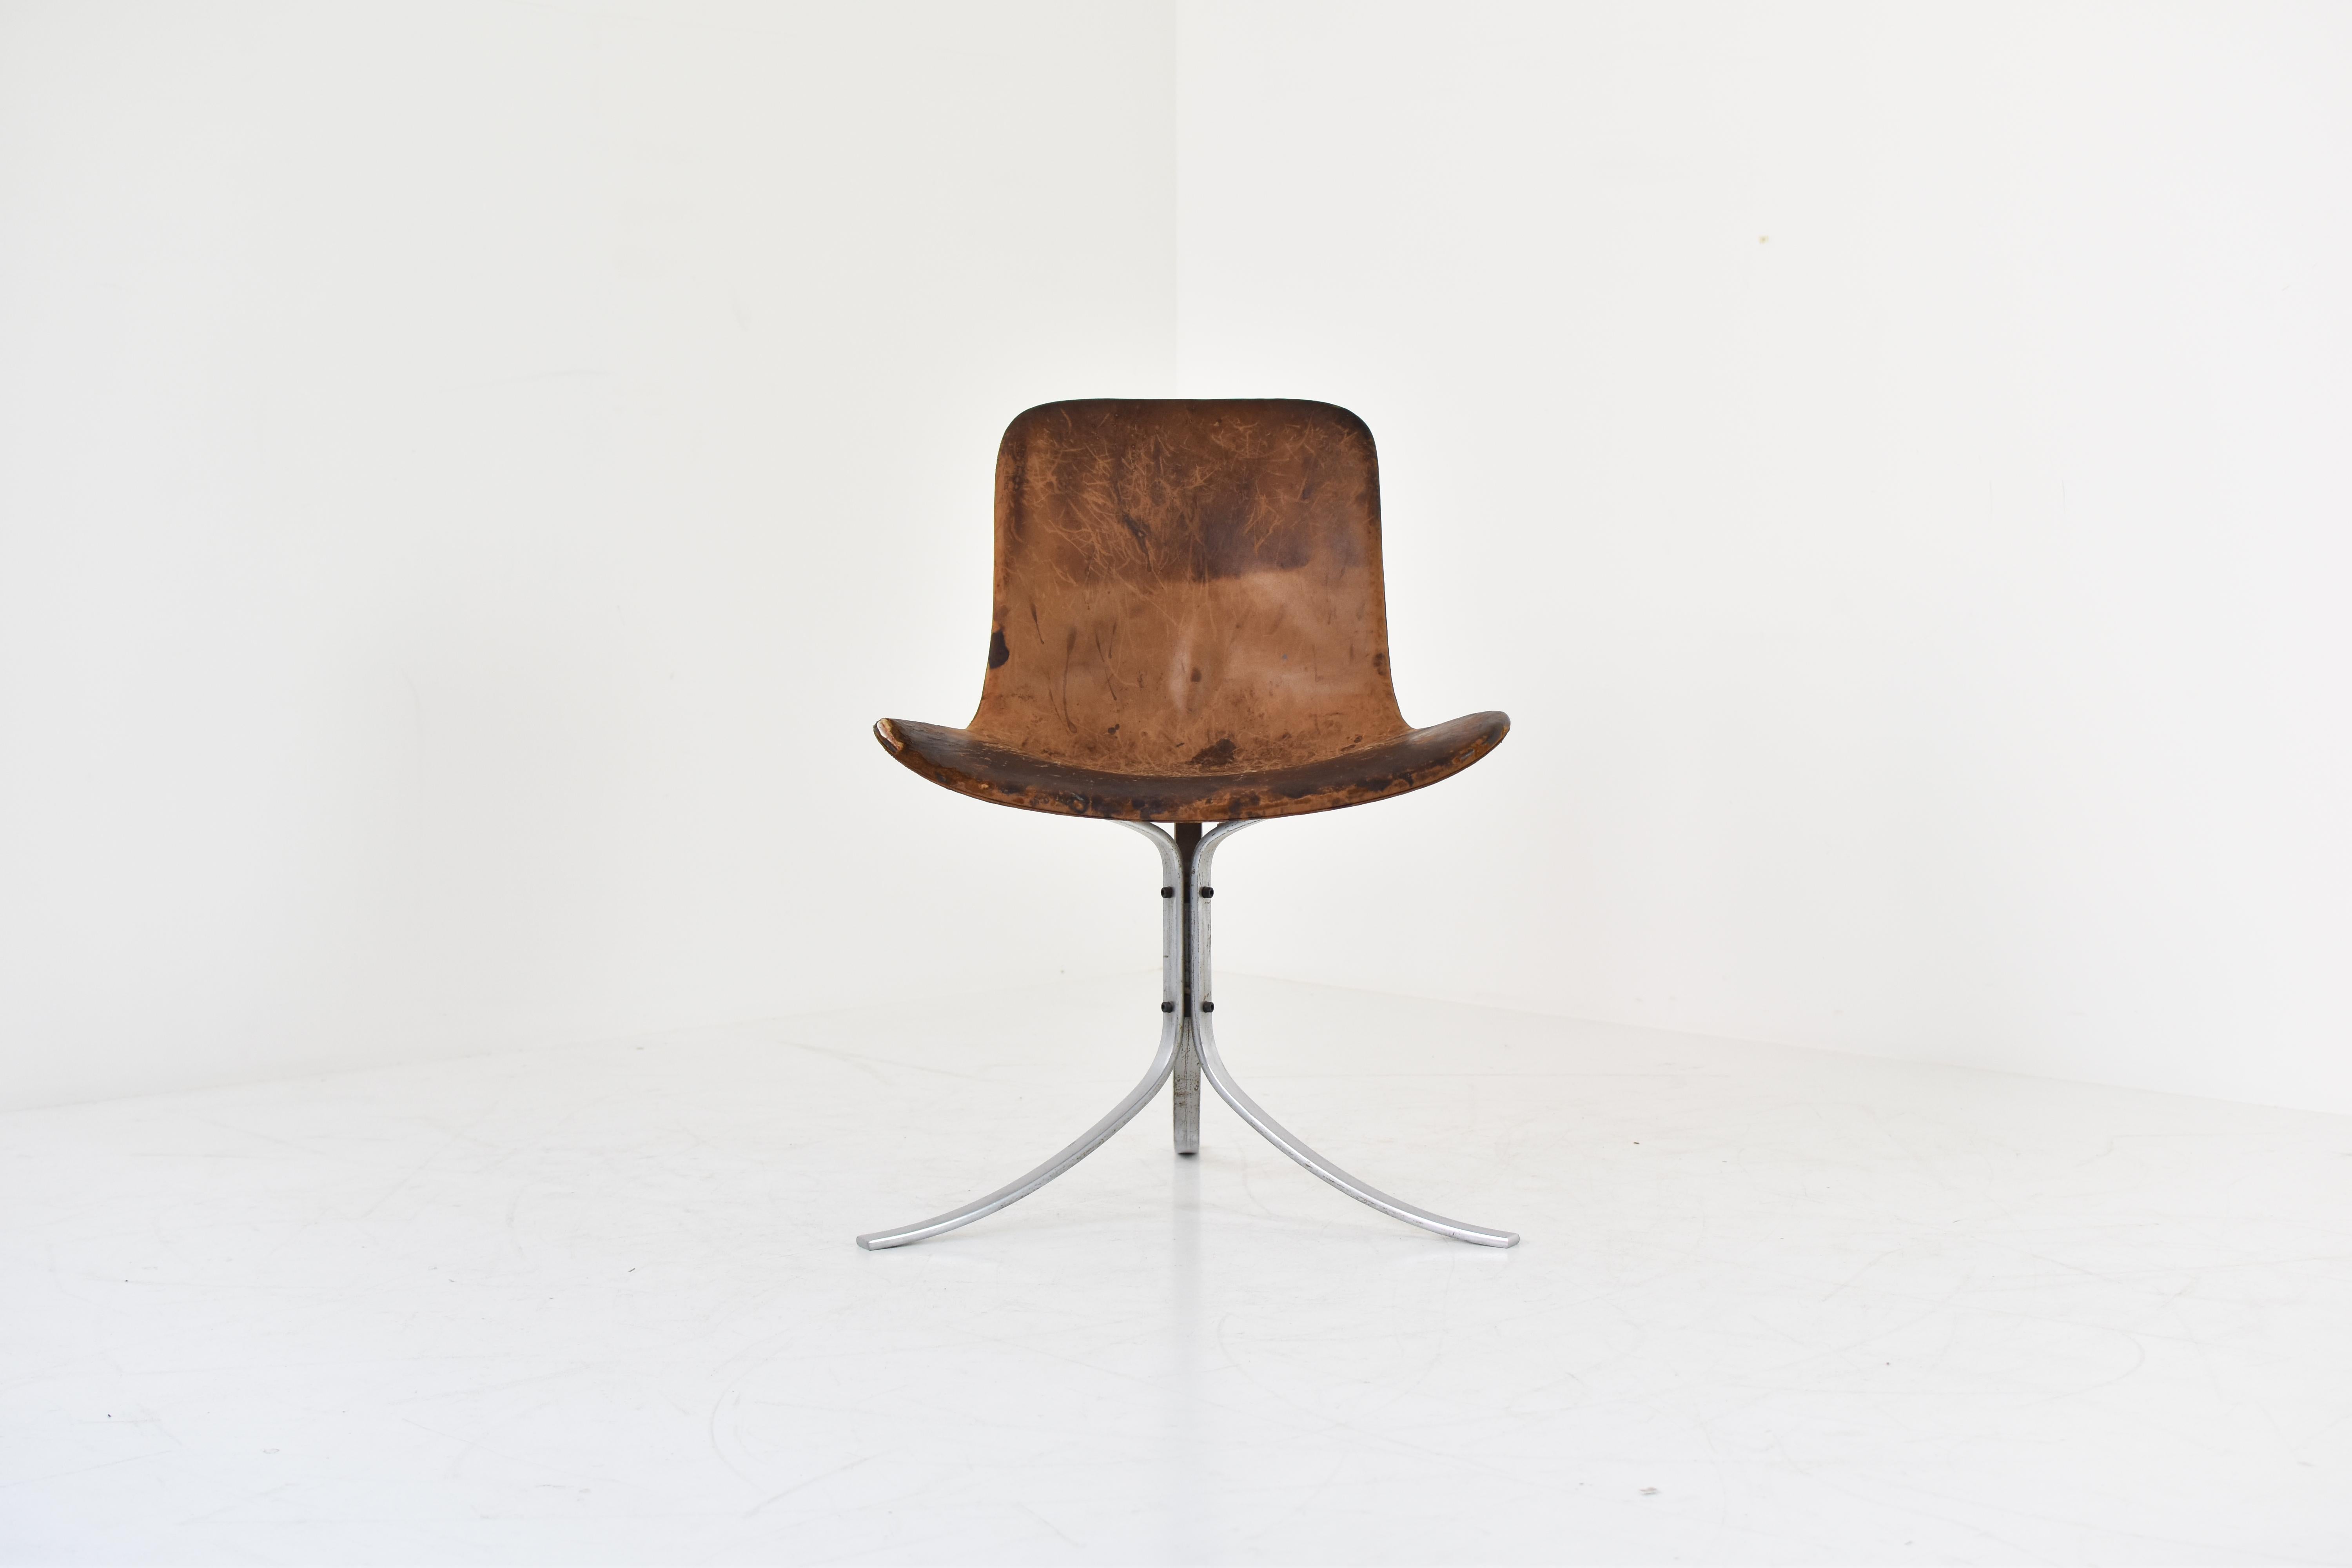 First edition PK9 tulip chair by Poul Kjaerholm for E. Kold Christensen, Denmark 1961. This chair features a flat steel frame and the original cognac leather upholstery. Superb patina with visible damage on the seating. Marked in the frame with the